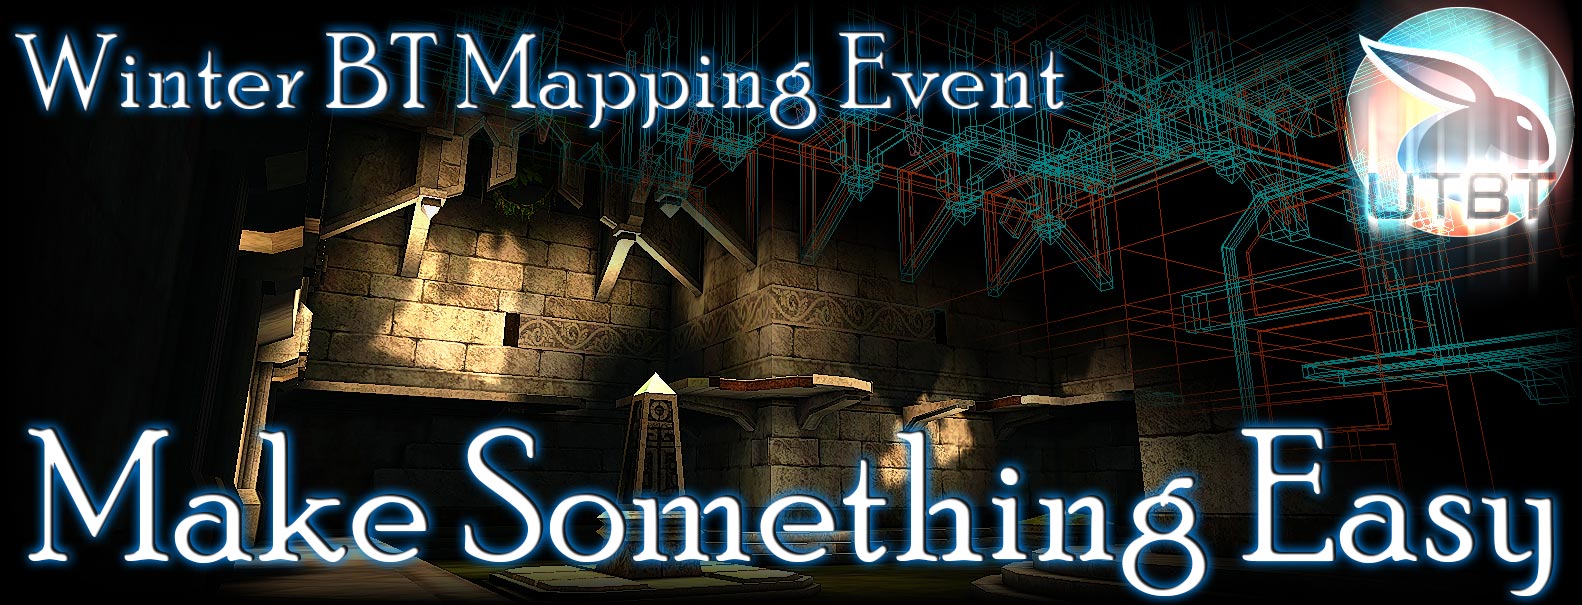 Mapping contest details